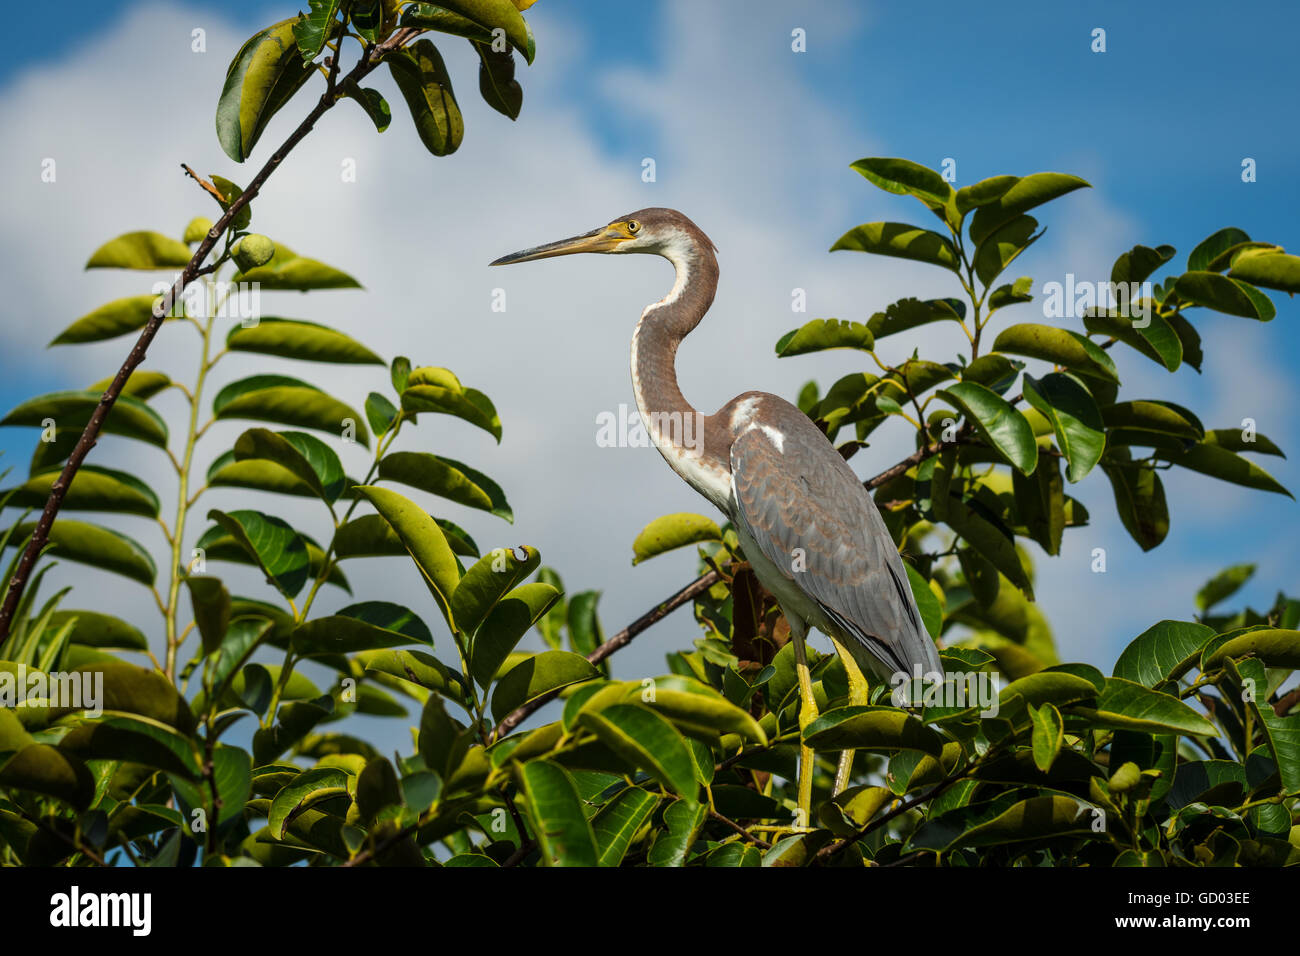 Tricolor Heron perched on a tree branch against a blue sky with puffy clouds Stock Photo